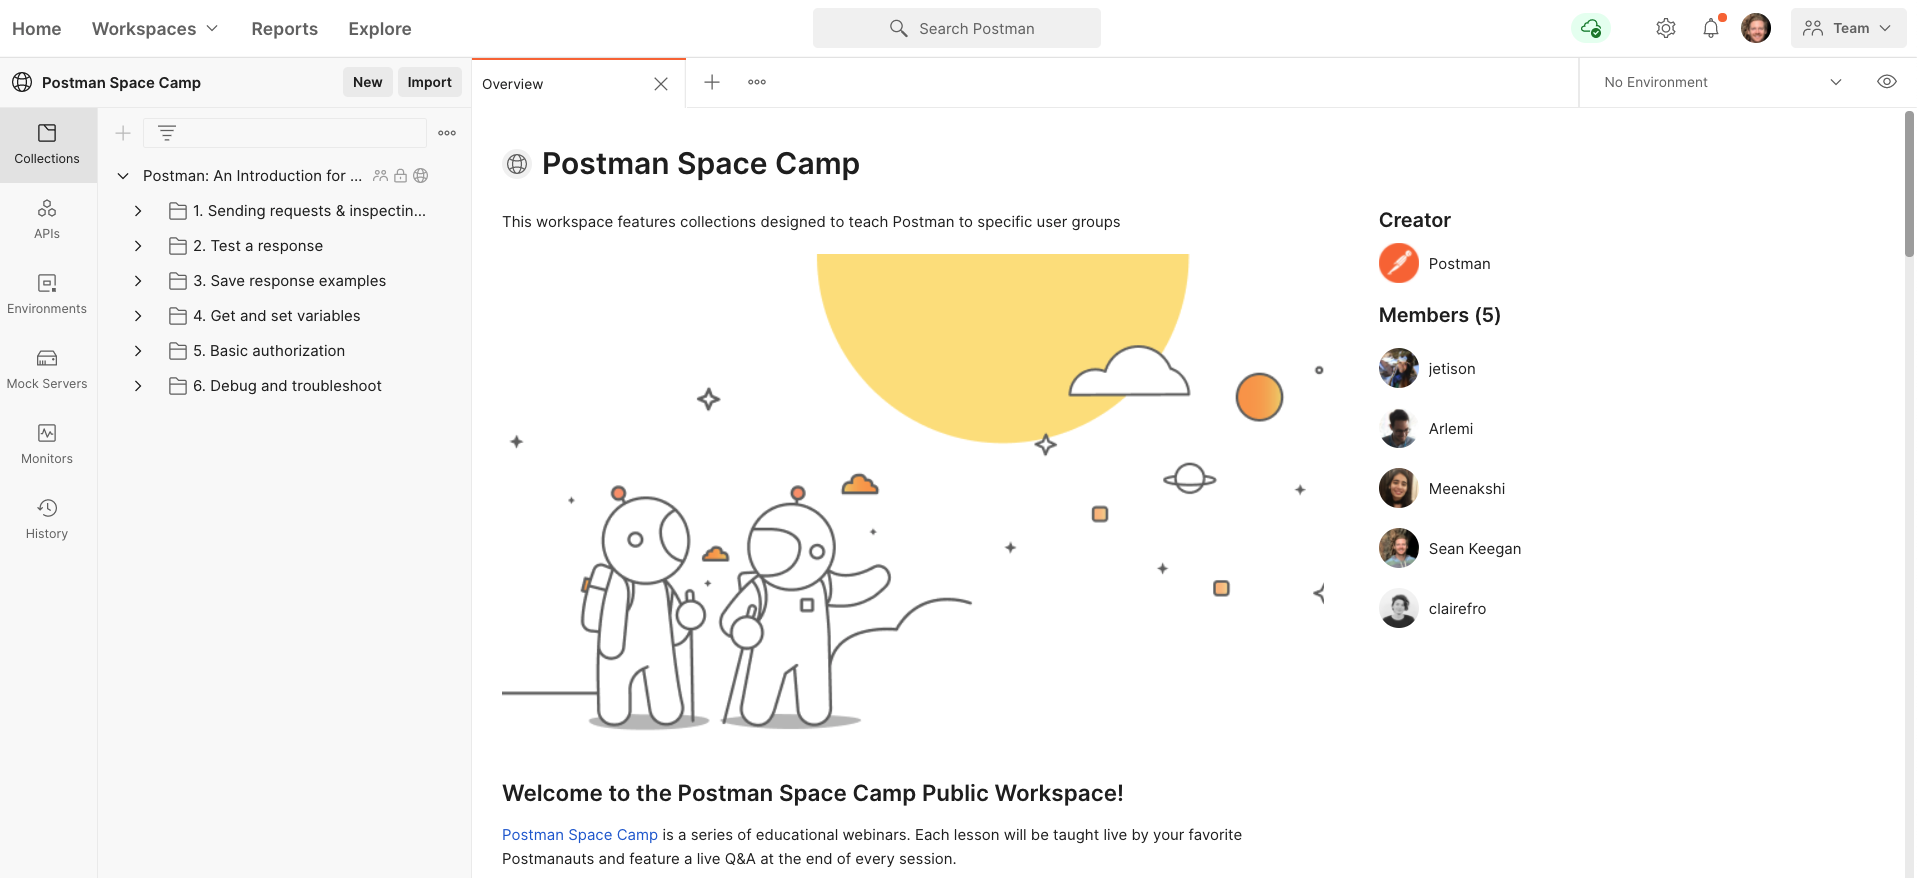 Postman Space Camp public workspace Overview page